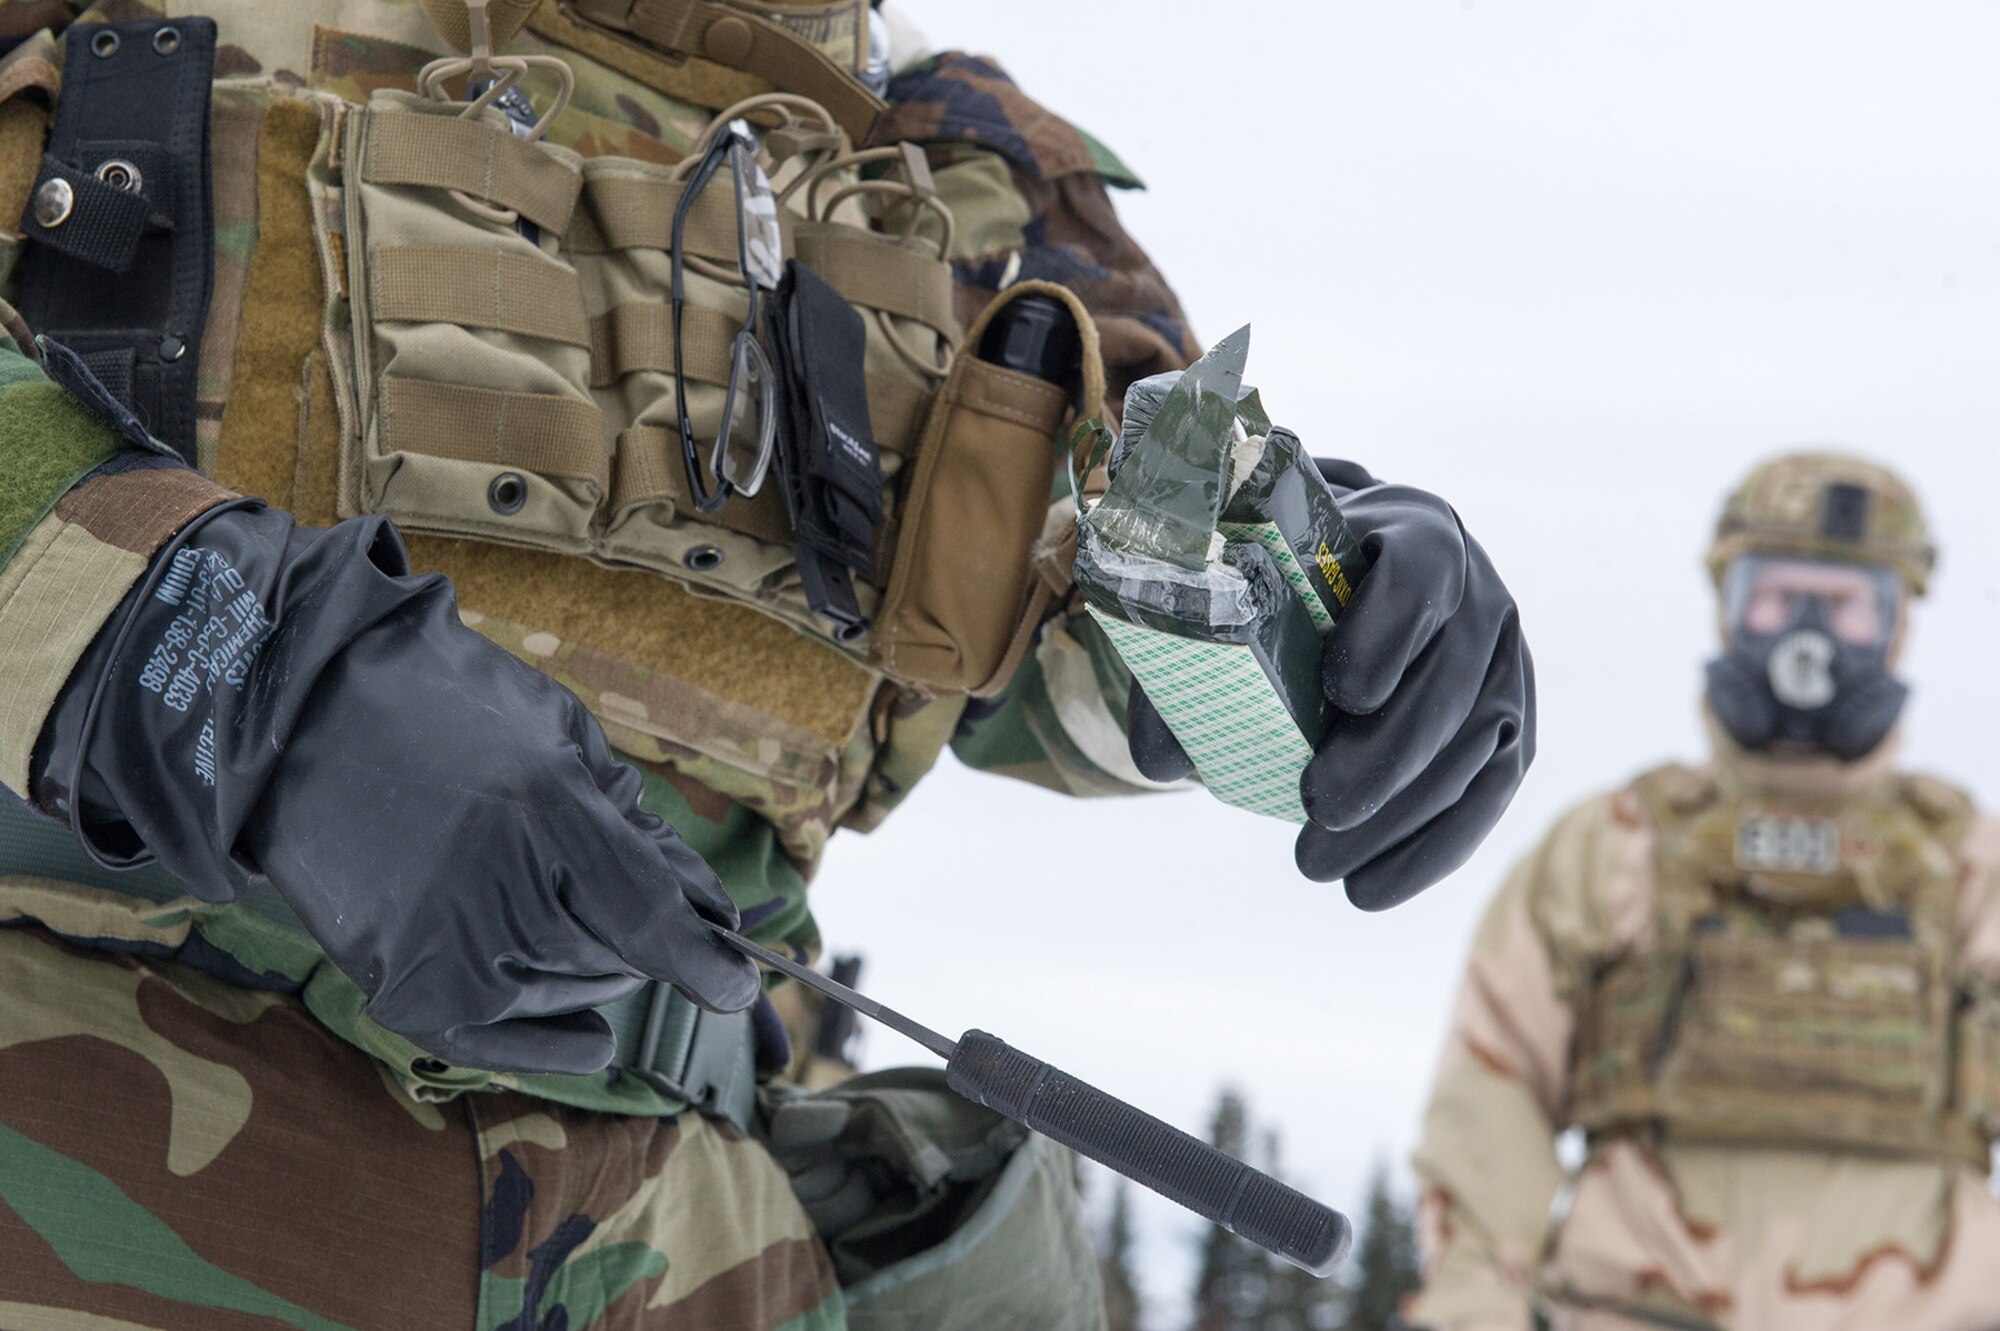 An Airman assigned to the 673d Civil Engineer Squadron, Explosives Ordinance Disposal Flight, prepares C-4 for a live-fire demolitions exercise in Mission Oriented Protective Posture 4 on Joint Base Elmendorf-Richardson, Alaska, Feb.14, 2018.  The Airmen were conducting EOD training in a simulated chemical weapons contaminated environment.